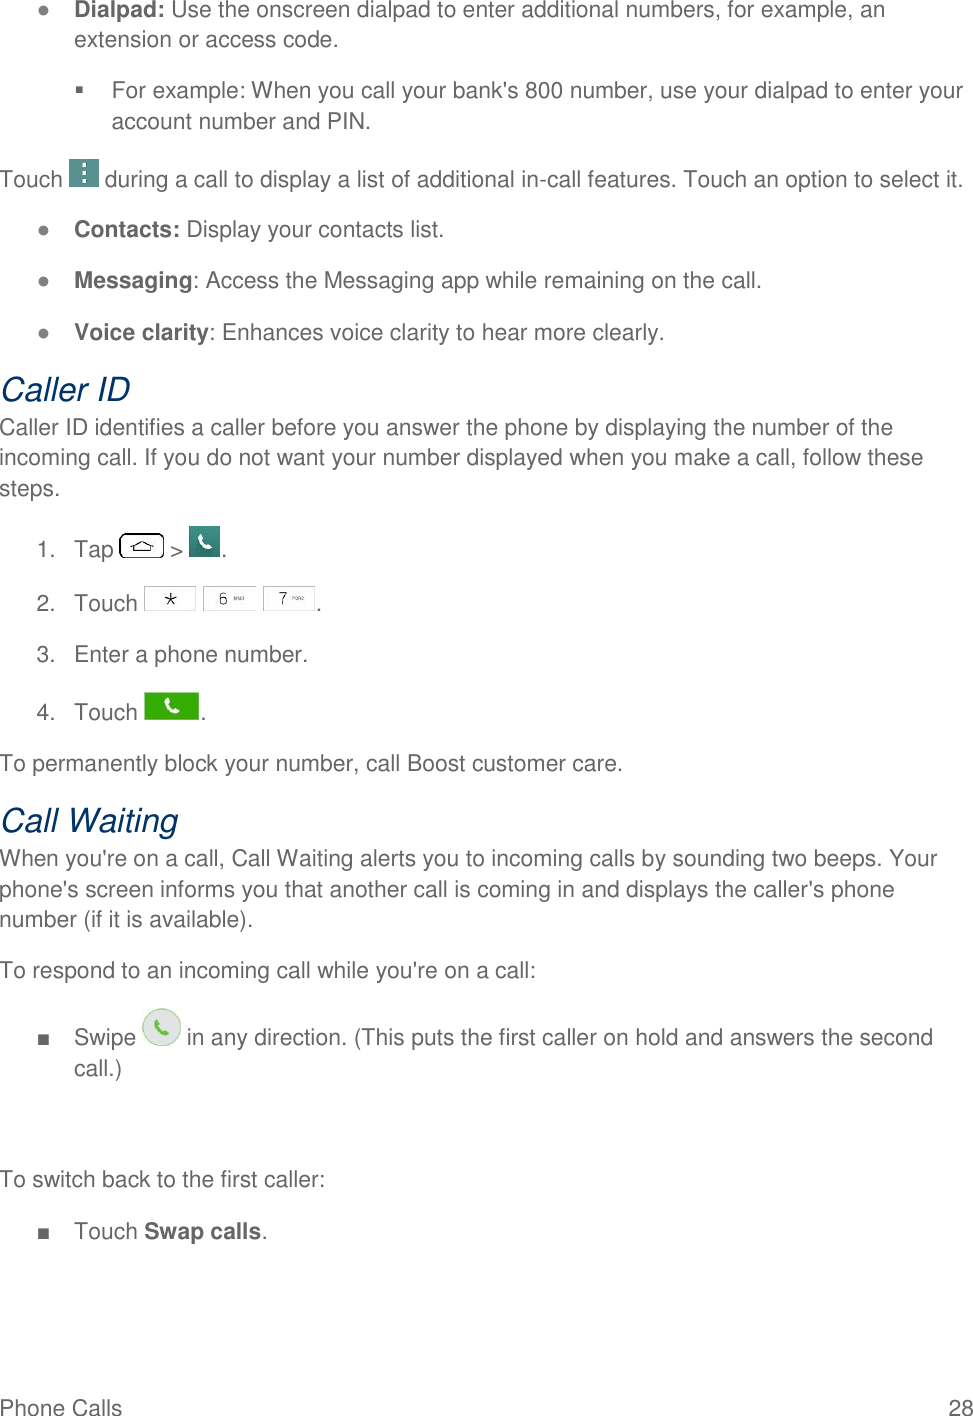 Phone Calls  28 ● Dialpad: Use the onscreen dialpad to enter additional numbers, for example, an extension or access code.   For example: When you call your bank&apos;s 800 number, use your dialpad to enter your account number and PIN.  Touch   during a call to display a list of additional in-call features. Touch an option to select it.  ● Contacts: Display your contacts list. ● Messaging: Access the Messaging app while remaining on the call. ● Voice clarity: Enhances voice clarity to hear more clearly. Caller ID Caller ID identifies a caller before you answer the phone by displaying the number of the incoming call. If you do not want your number displayed when you make a call, follow these steps. 1.  Tap   &gt;  . 2.  Touch      . 3.  Enter a phone number. 4.  Touch  . To permanently block your number, call Boost customer care. Call Waiting When you&apos;re on a call, Call Waiting alerts you to incoming calls by sounding two beeps. Your phone&apos;s screen informs you that another call is coming in and displays the caller&apos;s phone number (if it is available). To respond to an incoming call while you&apos;re on a call: ■  Swipe   in any direction. (This puts the first caller on hold and answers the second call.)   To switch back to the first caller: ■  Touch Swap calls. 